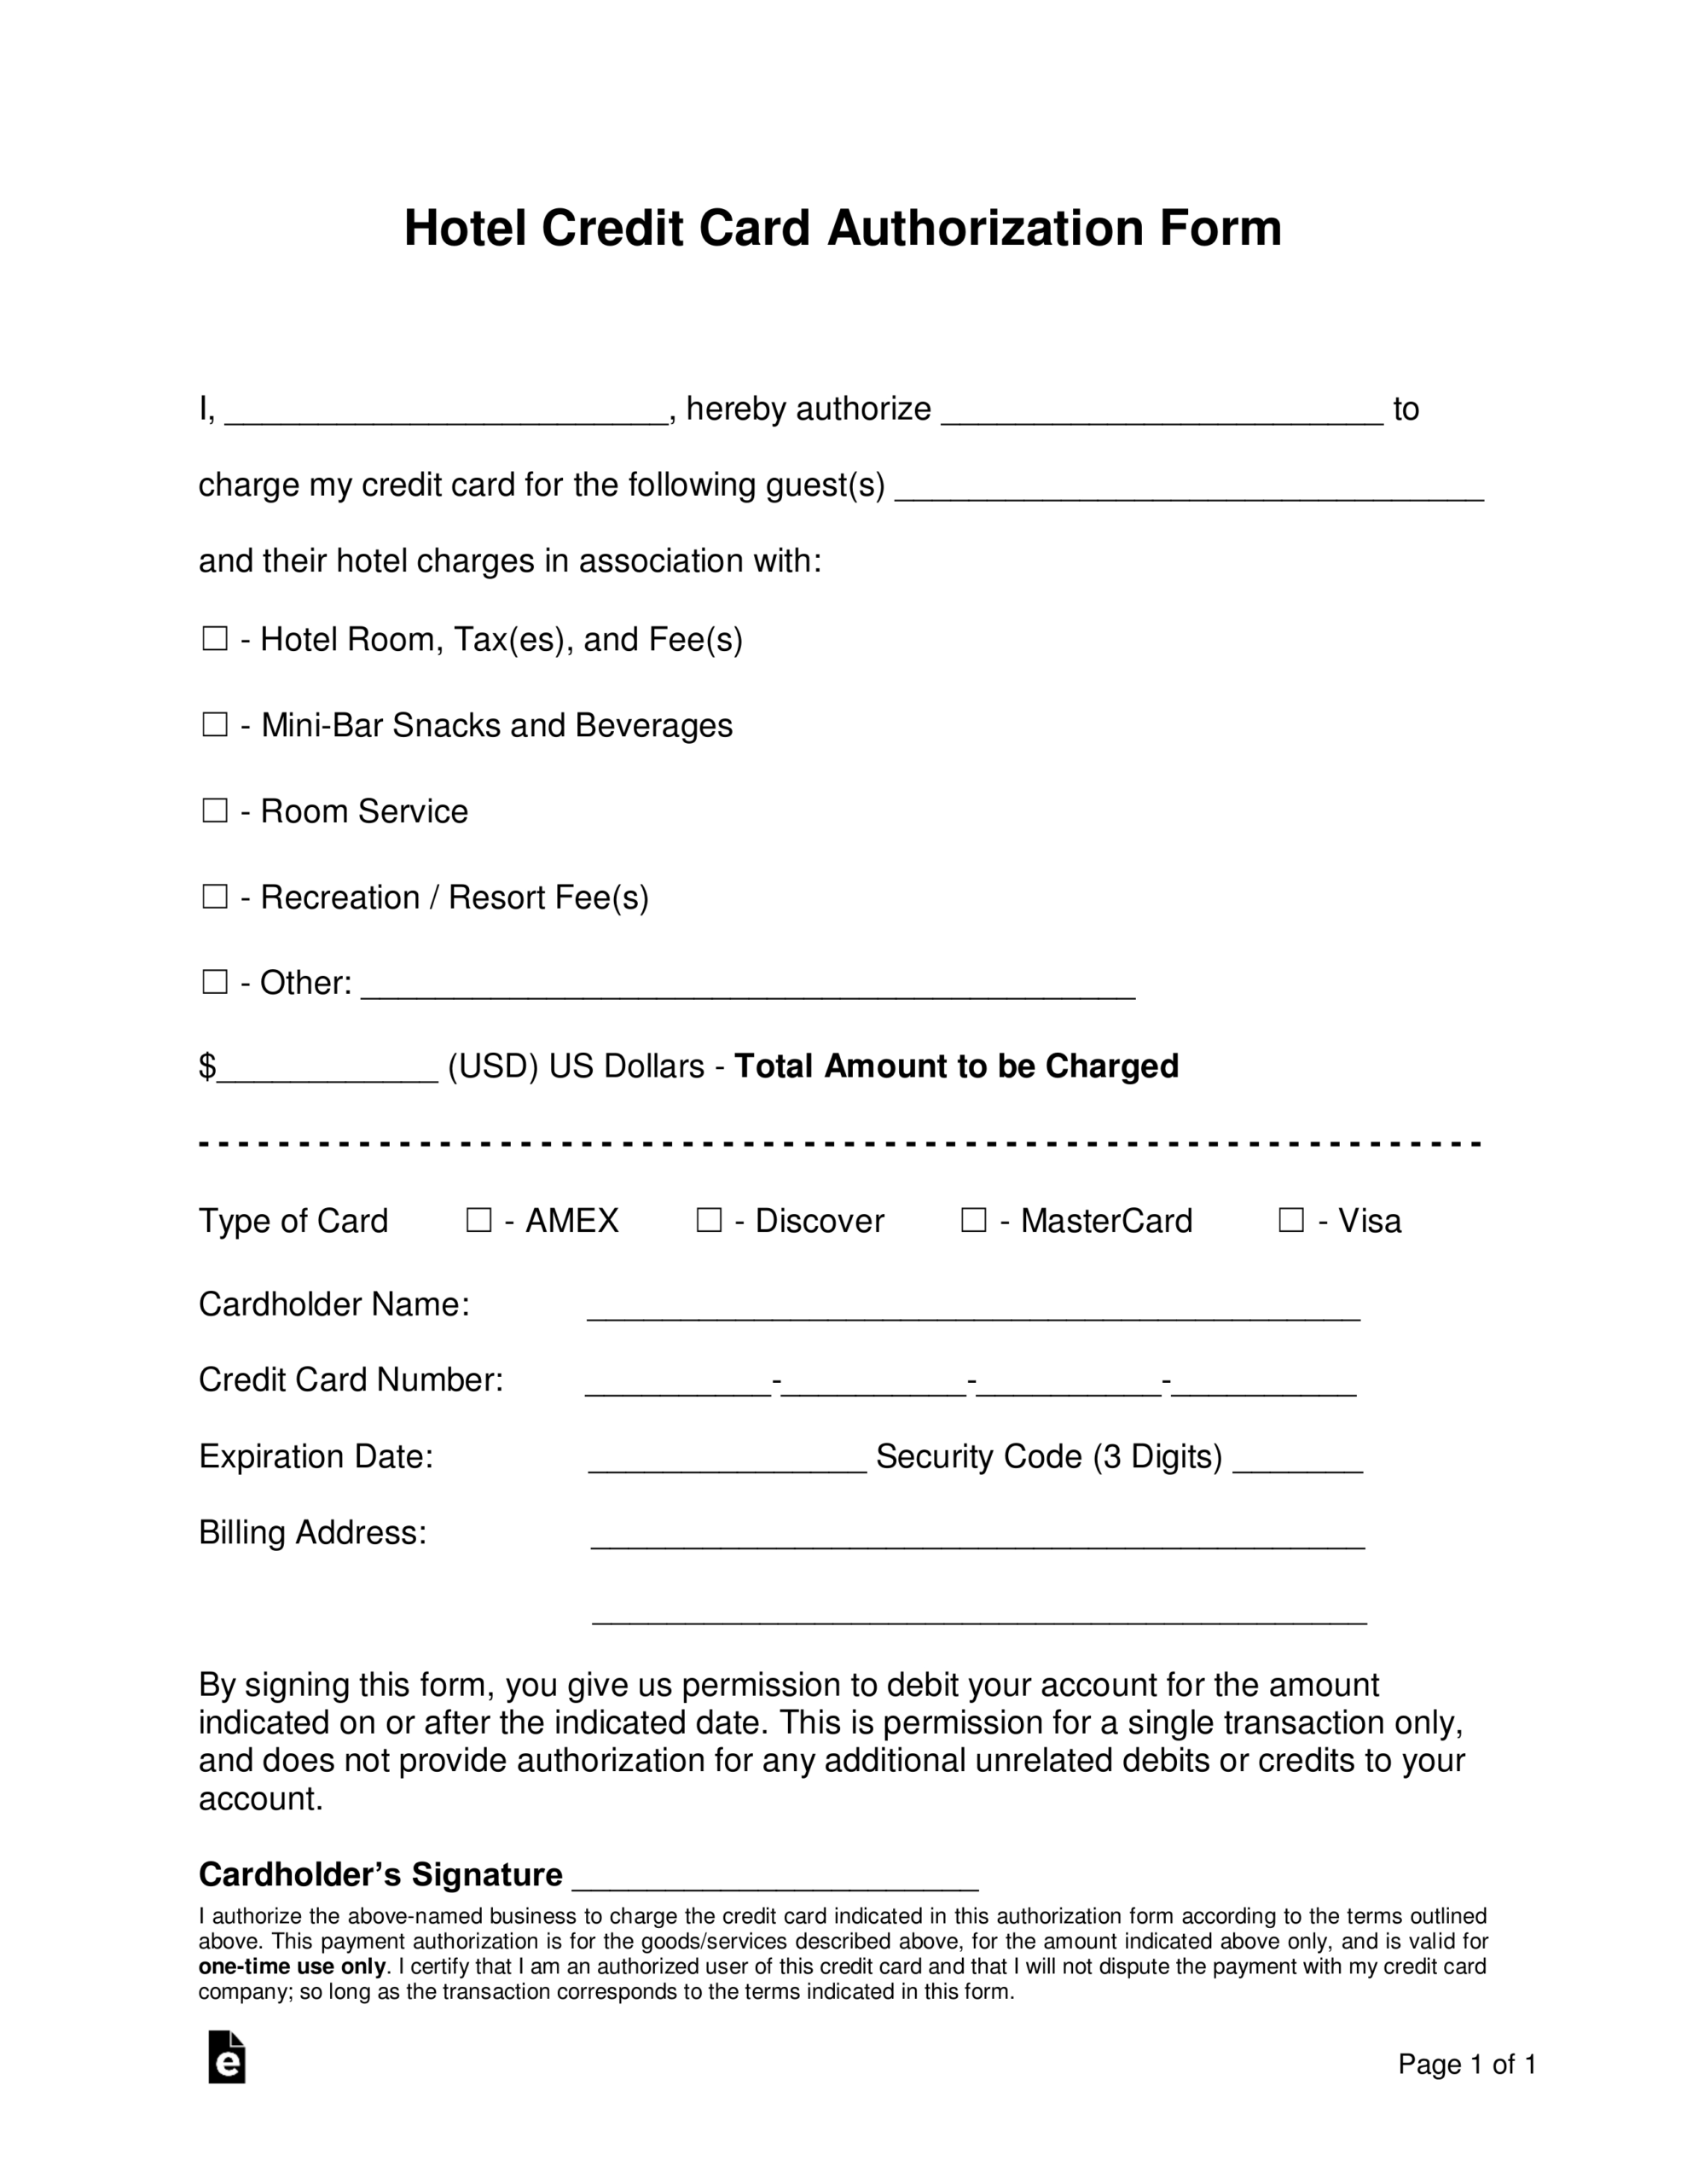 Free Hotel Credit Card Authorization Forms - Word | Pdf Within Hotel Credit Card Authorization Form Template